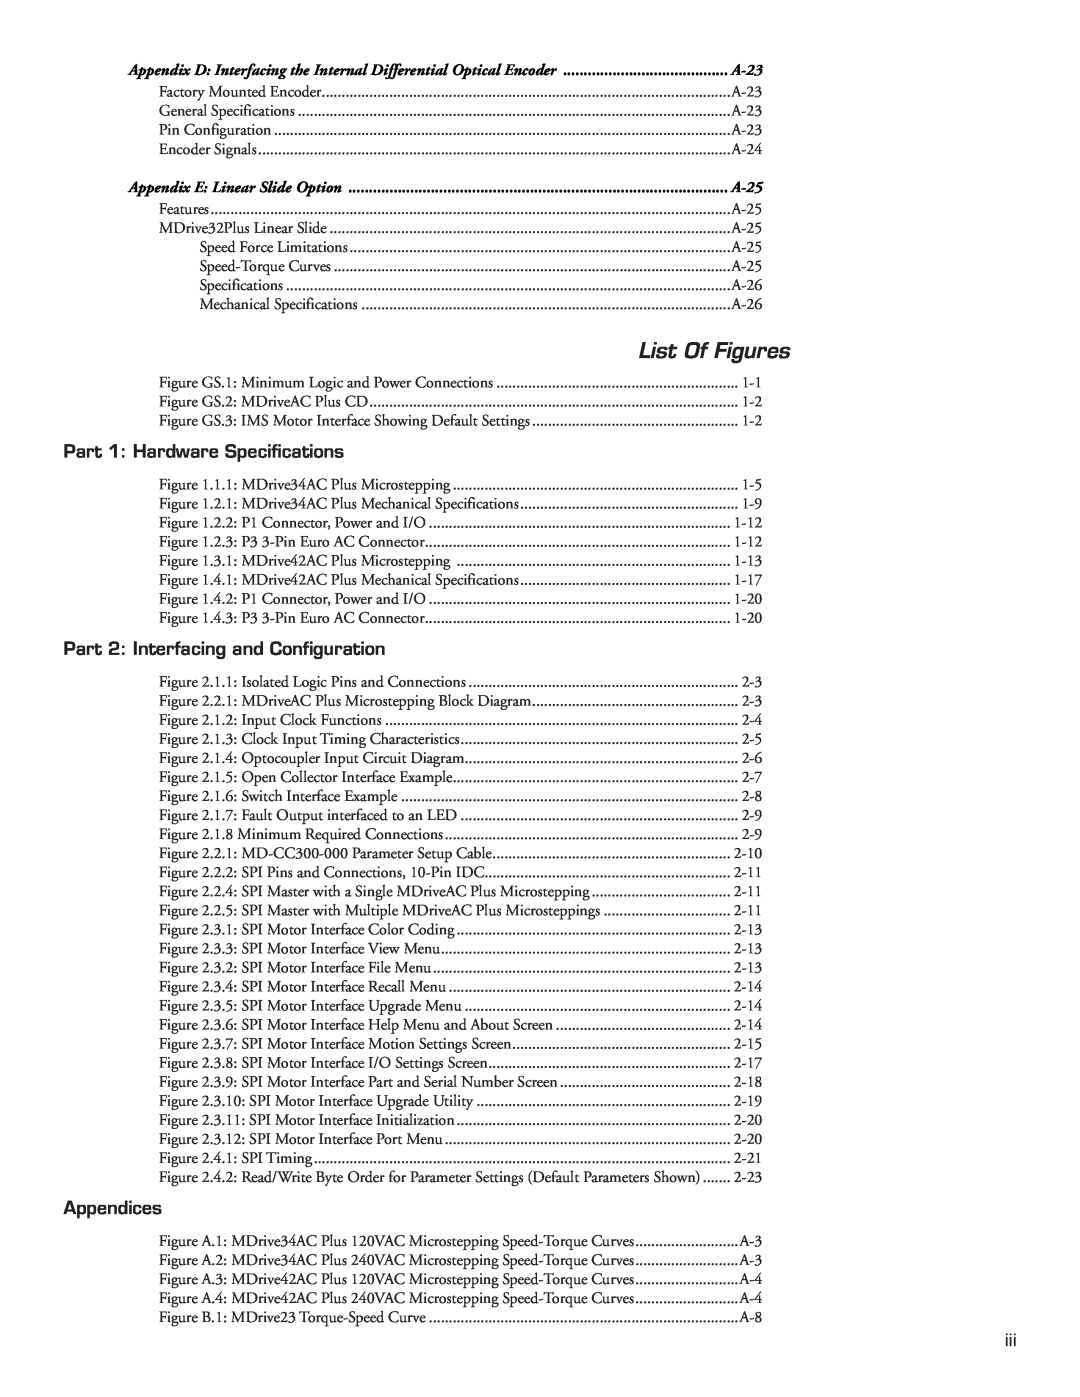 Intelligent Motion Systems MDrive34AC manual List Of Figures, Part 1: Hardware Specifications, Appendices, A-23, A-25 